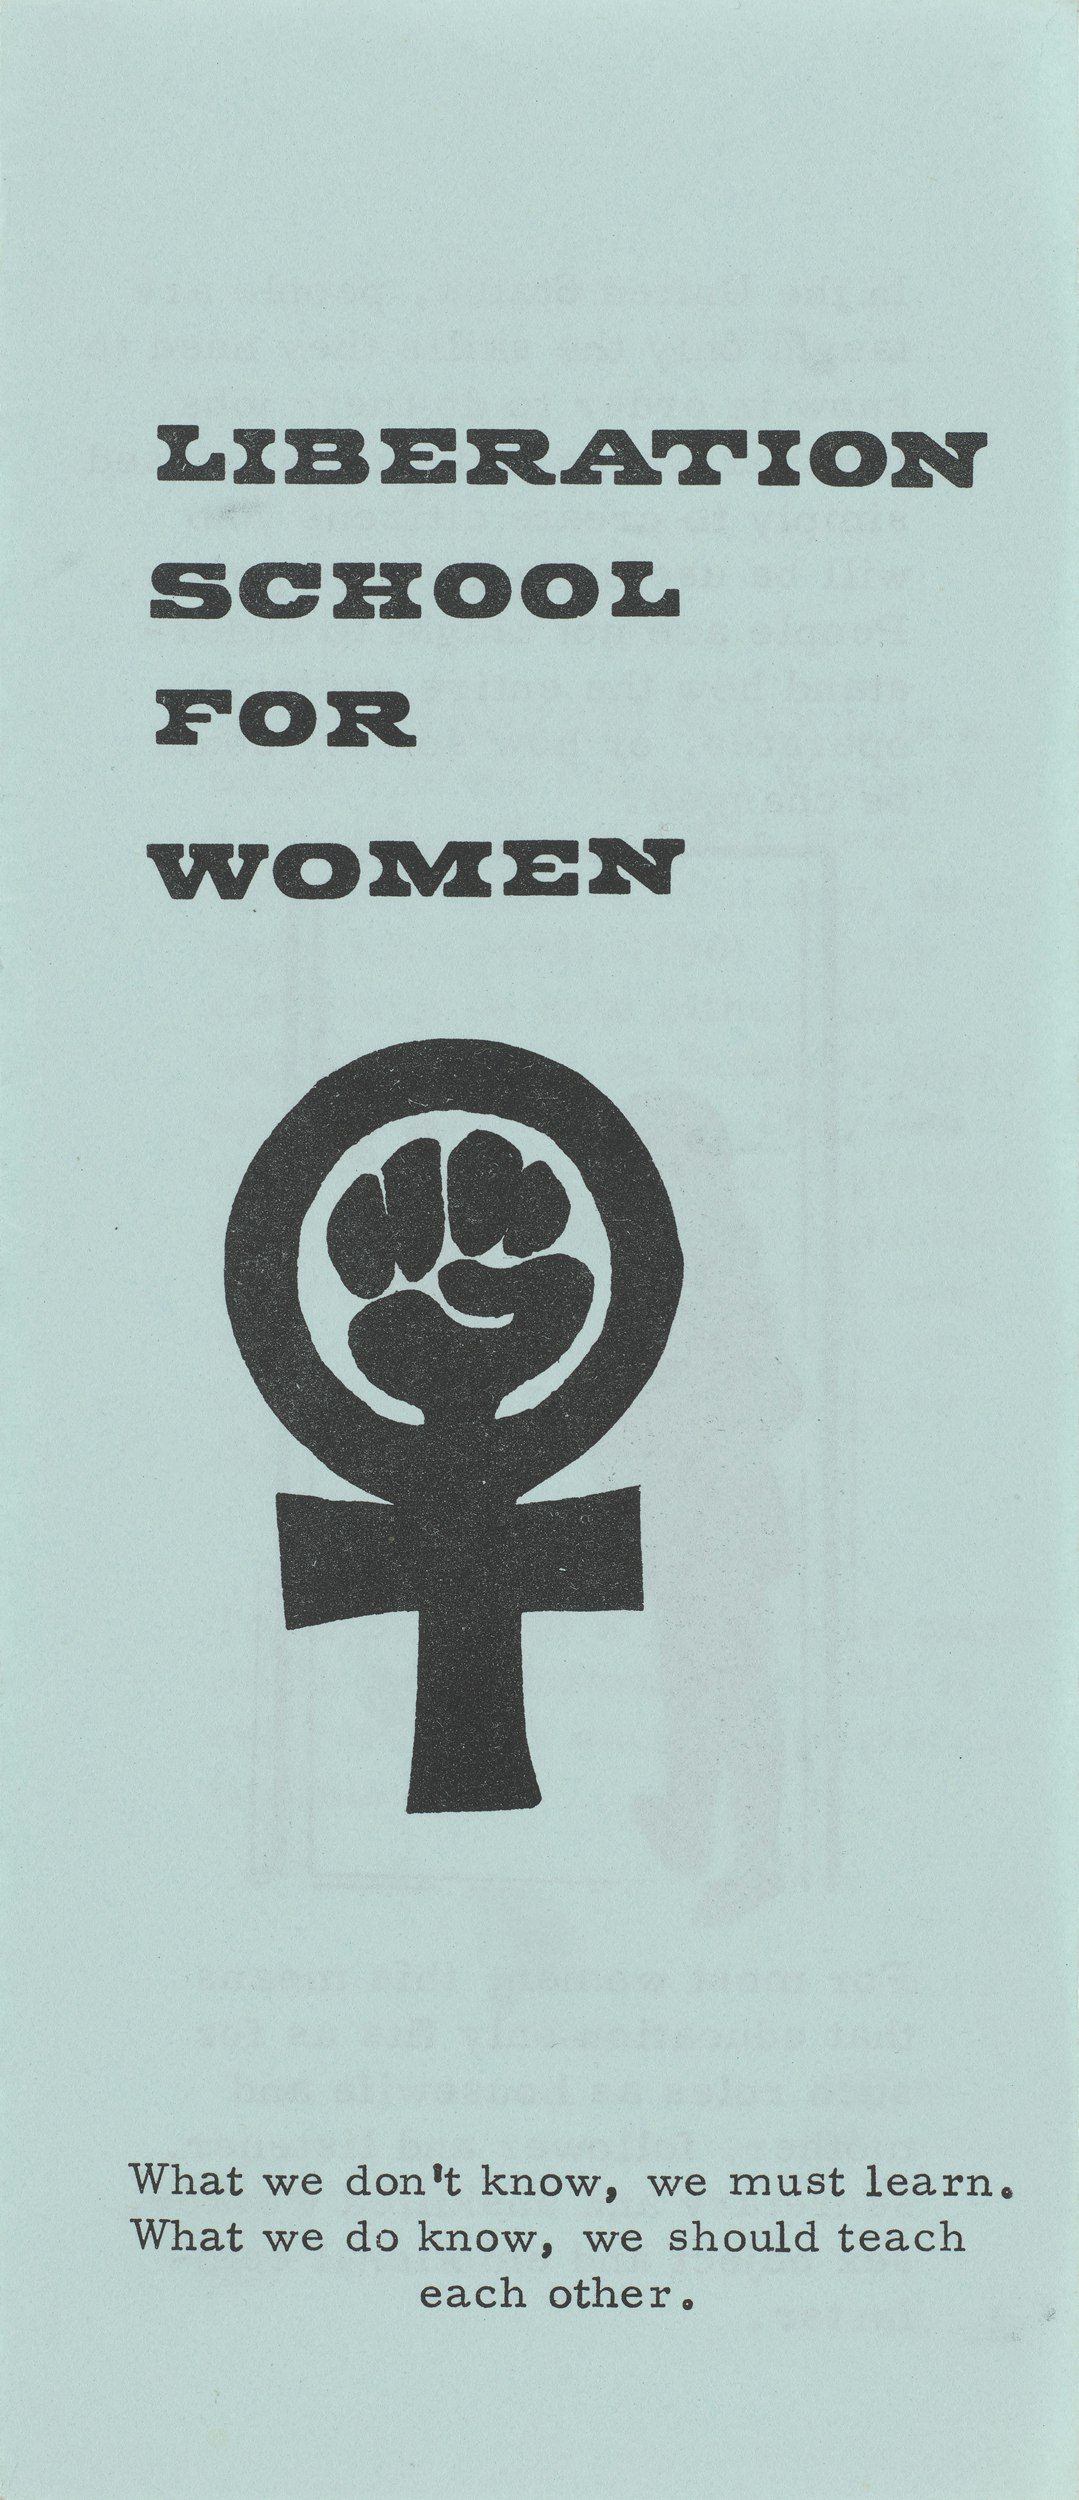 2023 12 15 Chicago Womens Liberation Pamphlet C3 Rothstein 04 1 Radcliffe Jf